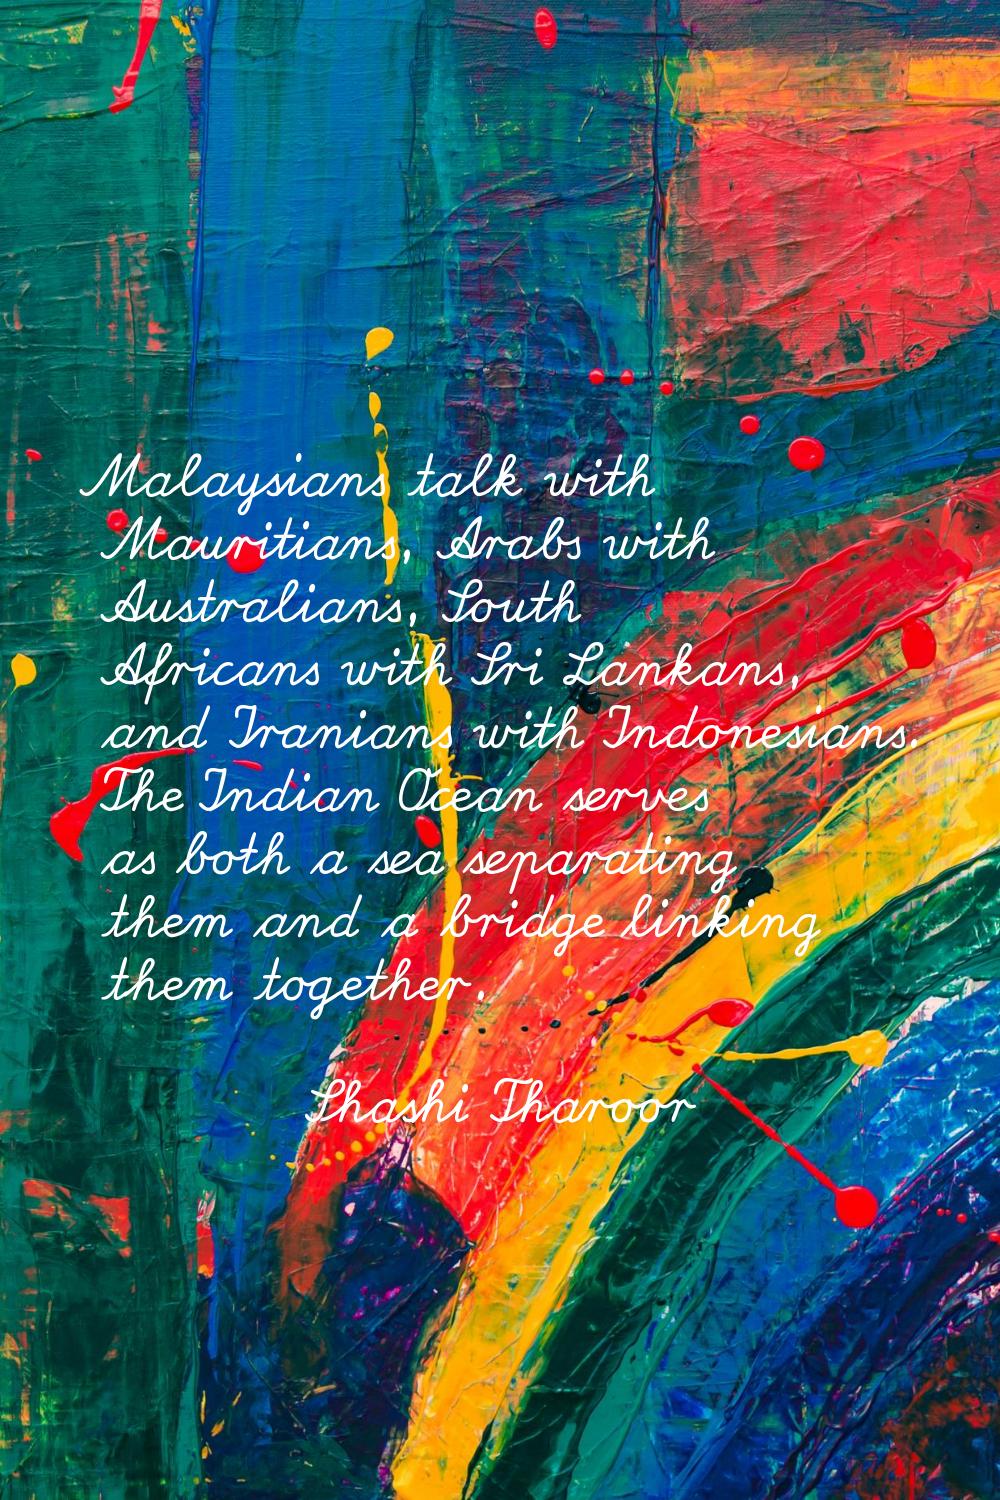 Malaysians talk with Mauritians, Arabs with Australians, South Africans with Sri Lankans, and Irani